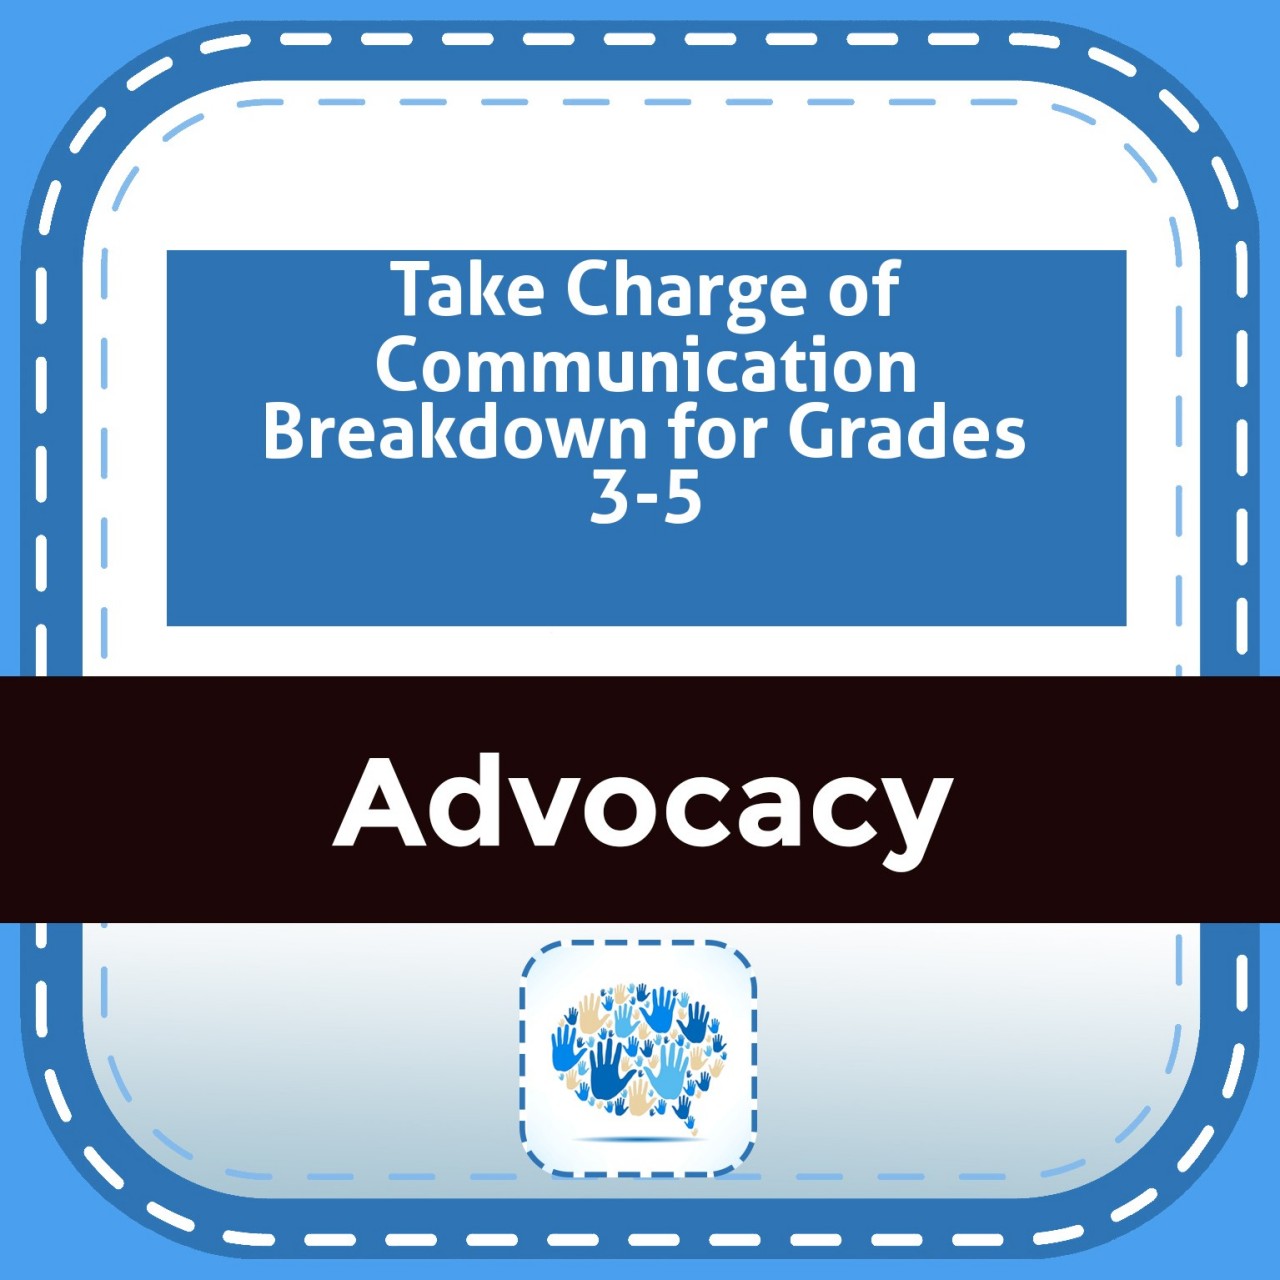 Take Charge of Communication Breakdown for Grades 3-5